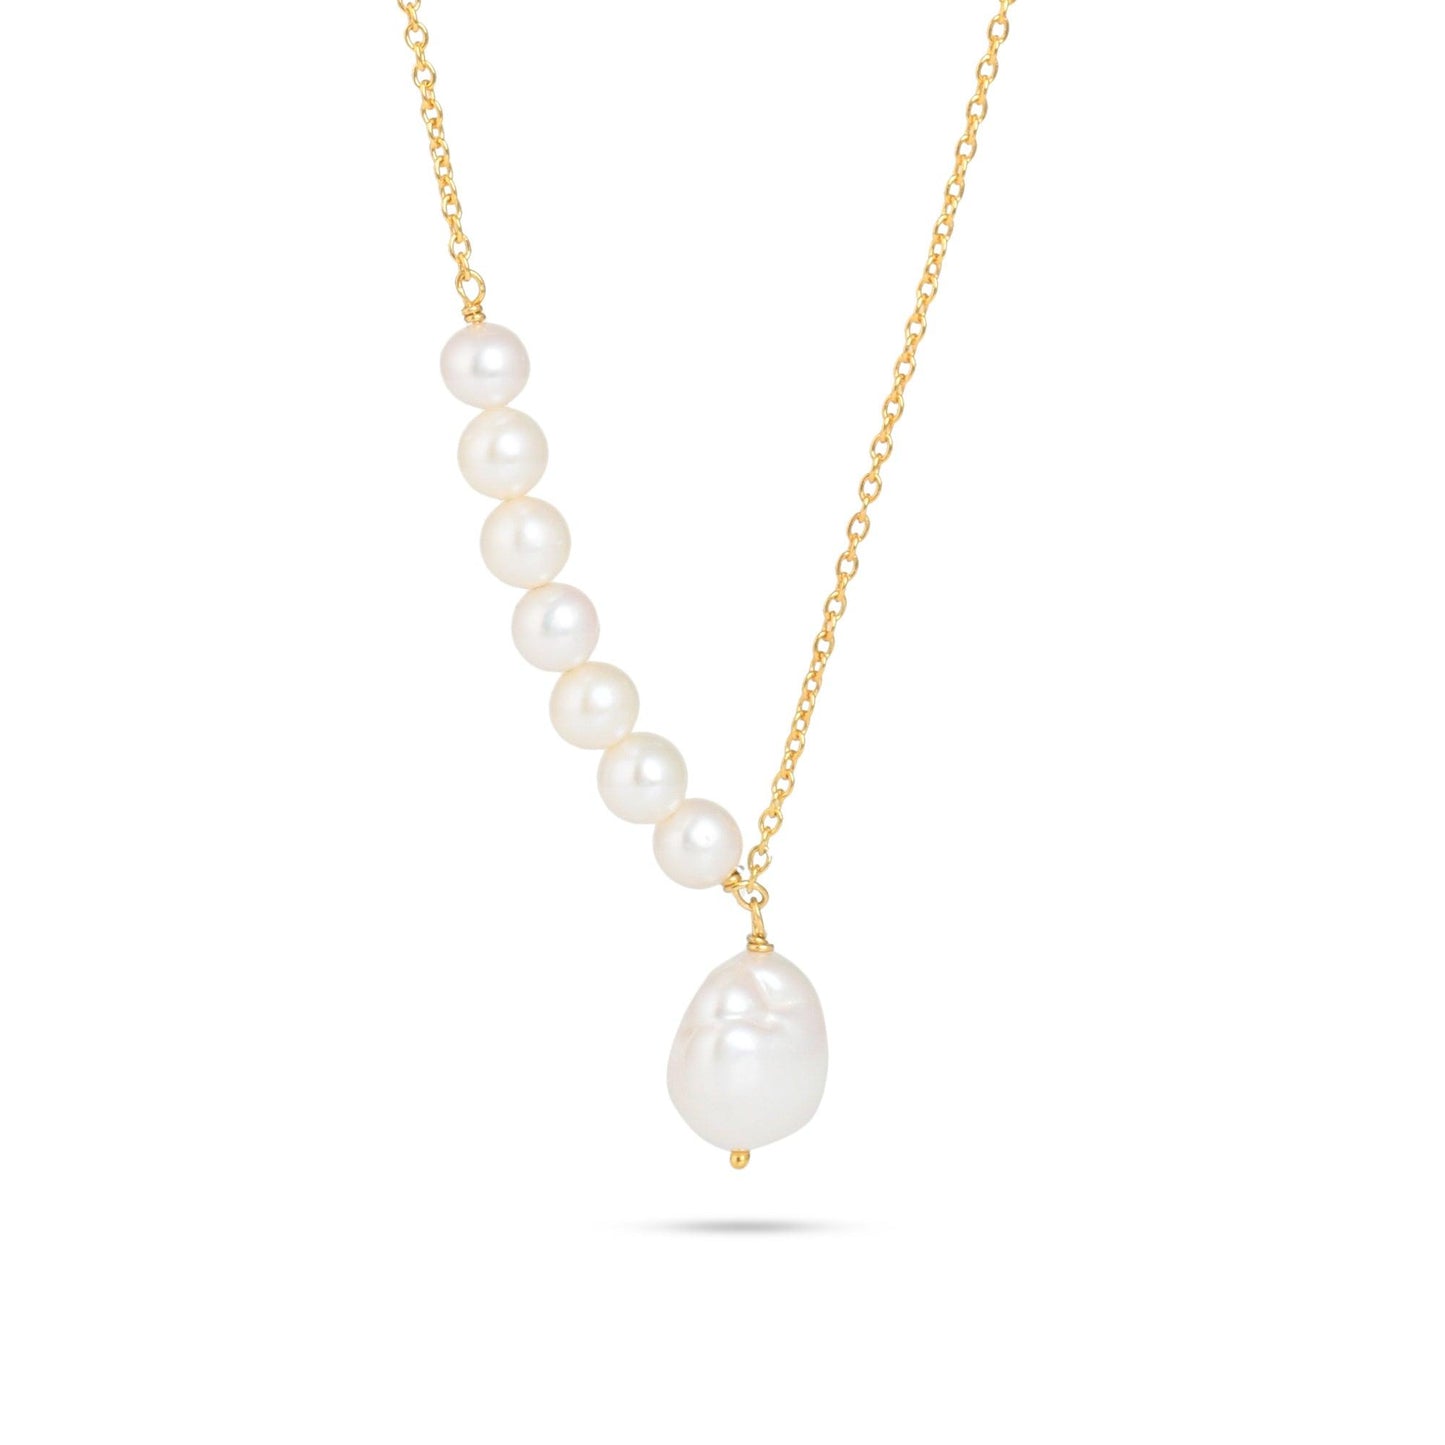 Natural Pearl Necklace| 925 Silver| 18kt Gold Plated - From Purl Purl